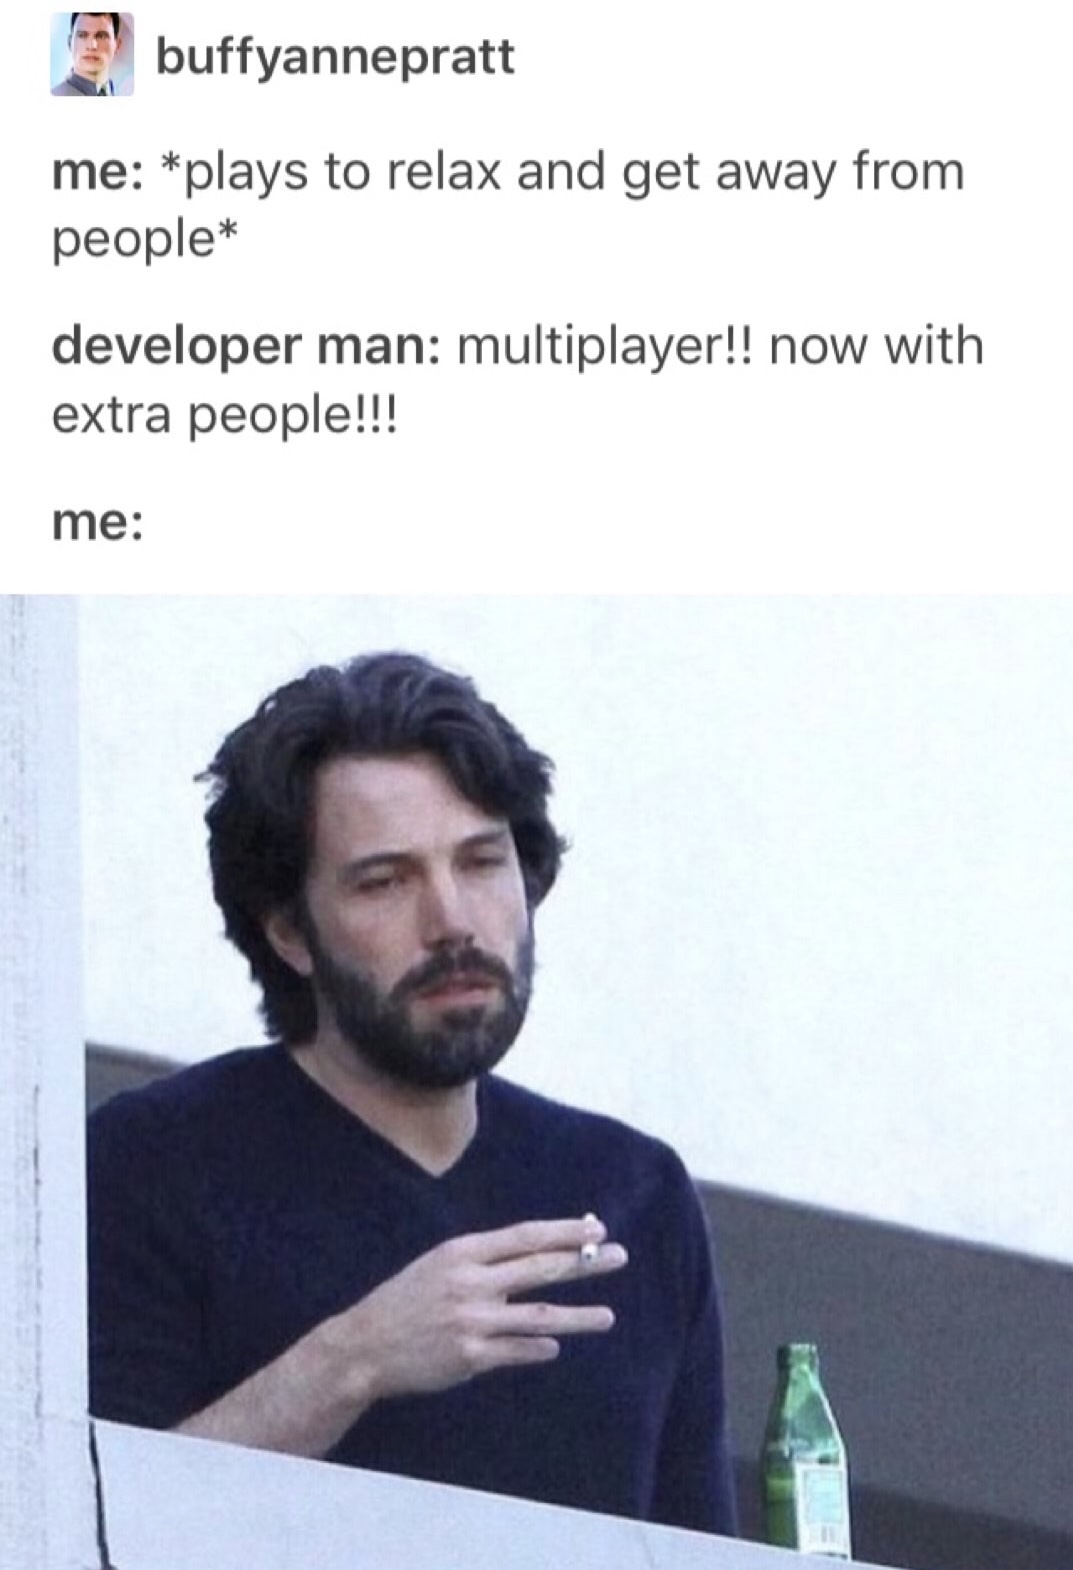 meme of days without suicidal thoughts - 13 buffyannepratt me plays to relax and get away from people developer man multiplayer!! now with extra people!!! me